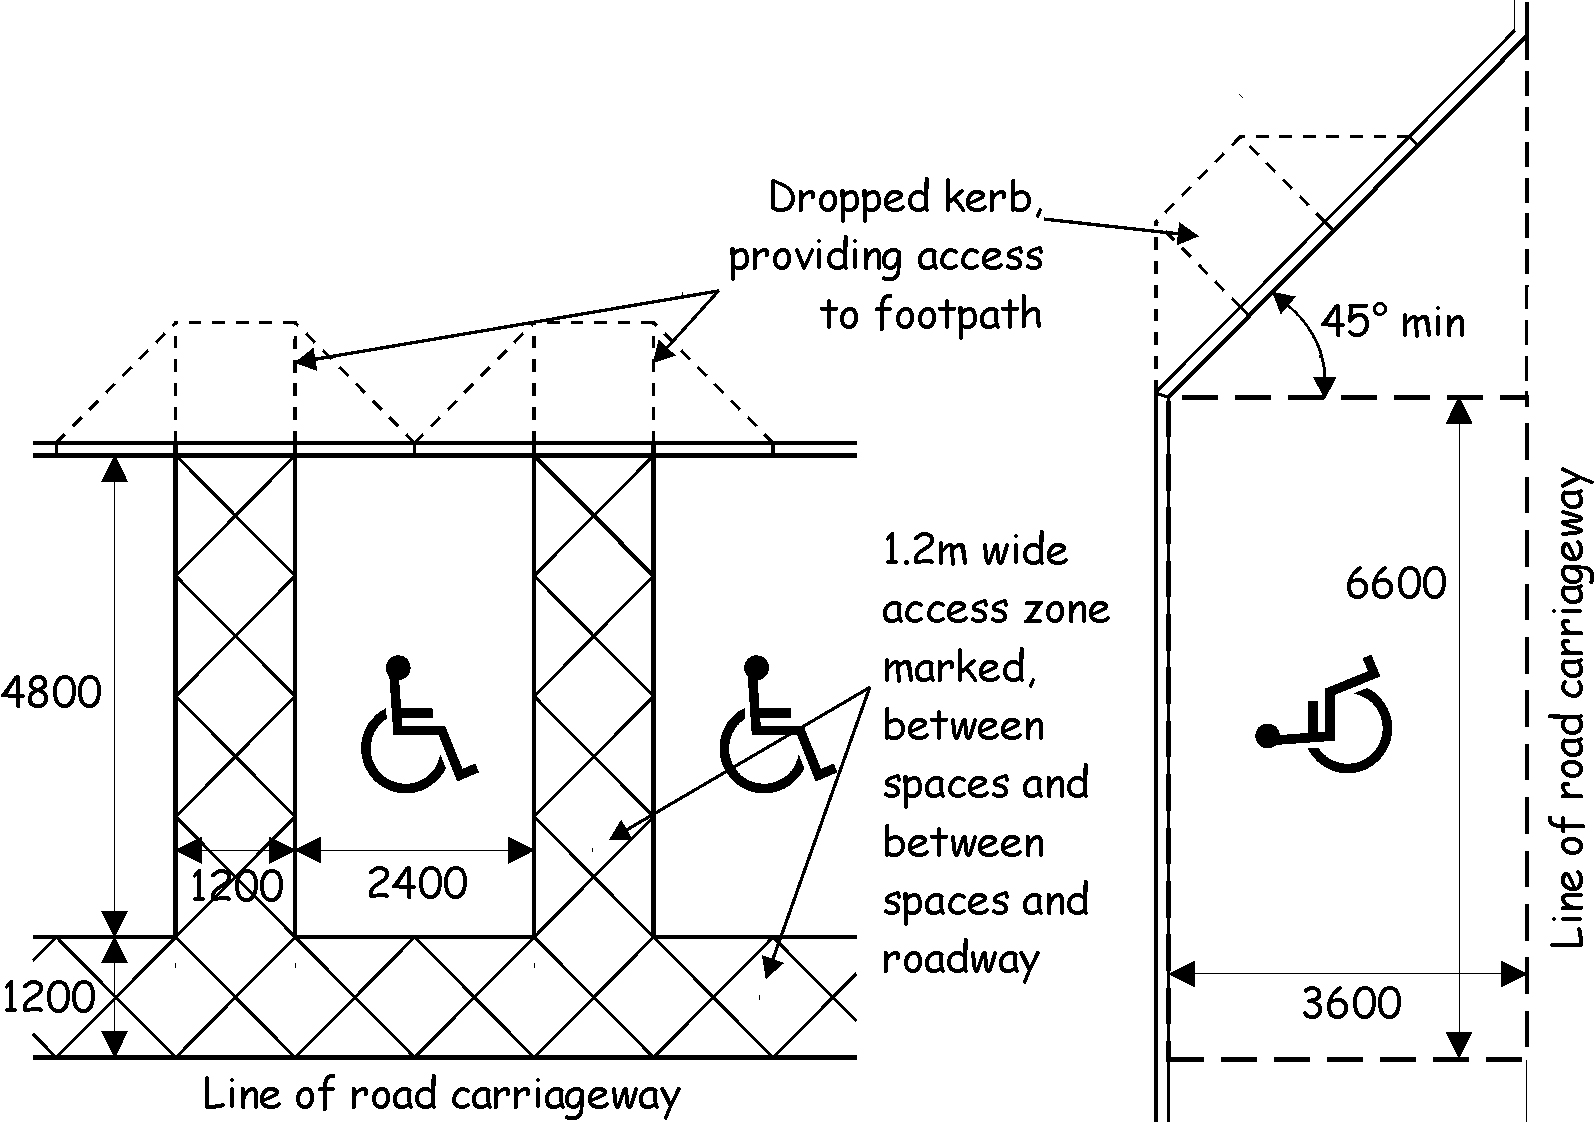 Off- and on-street accessible car parking